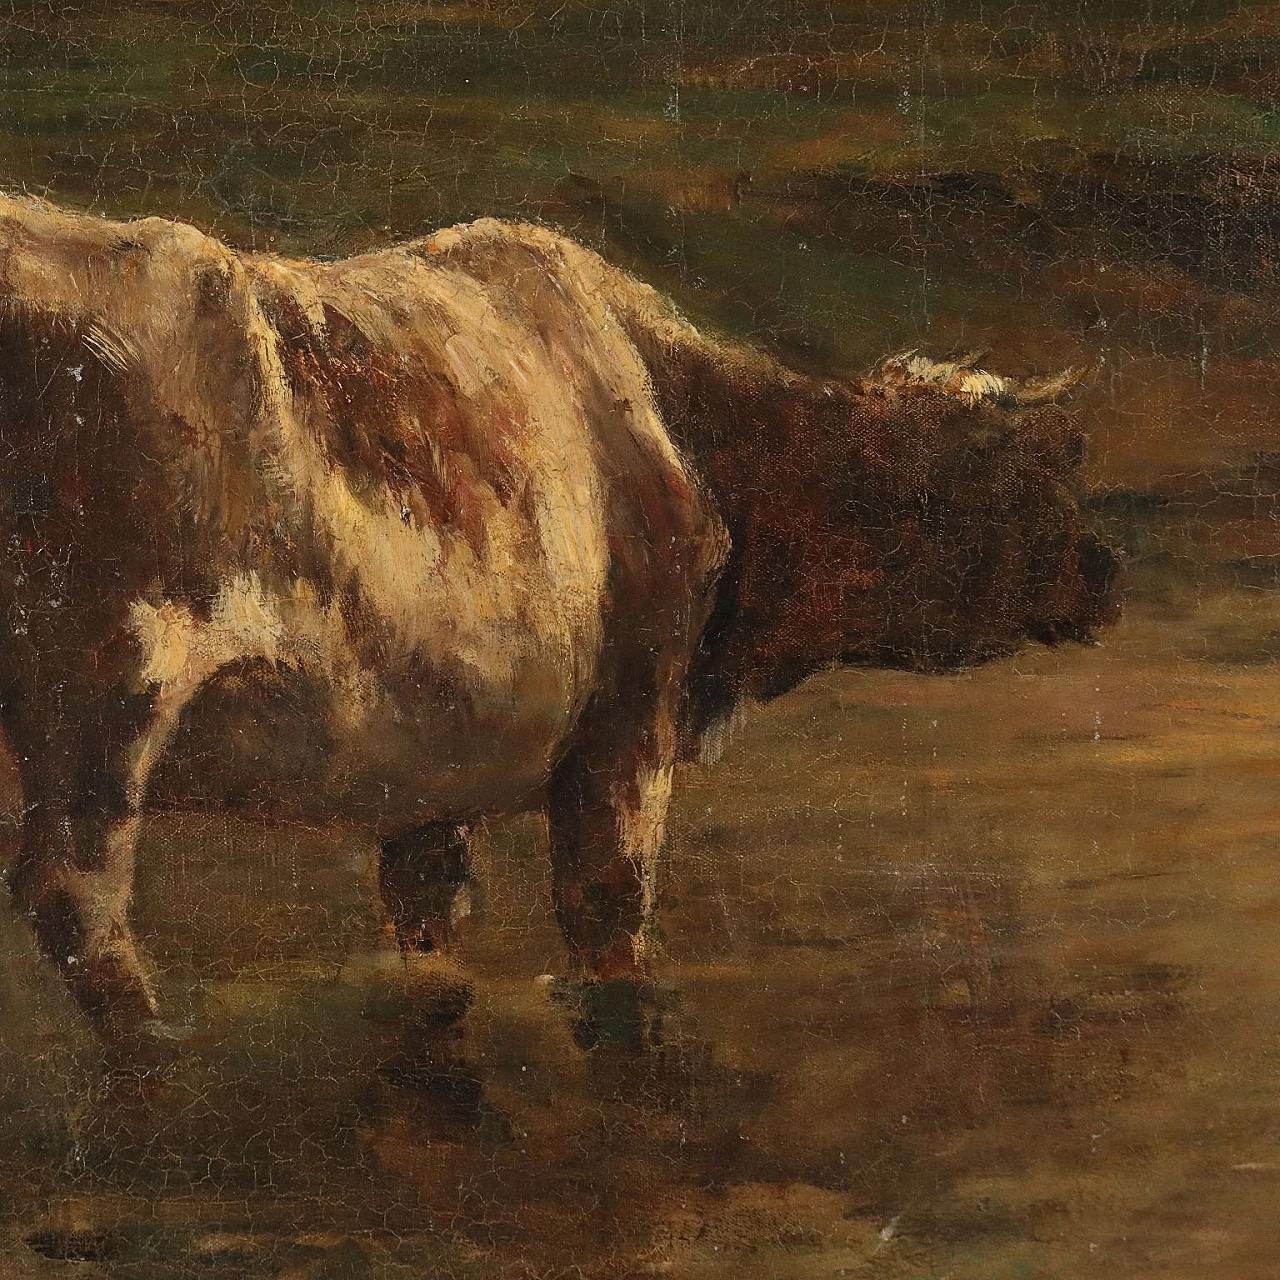 G. Pier Dieterle, Glimpse of countryside with cows, oil on canvas 4